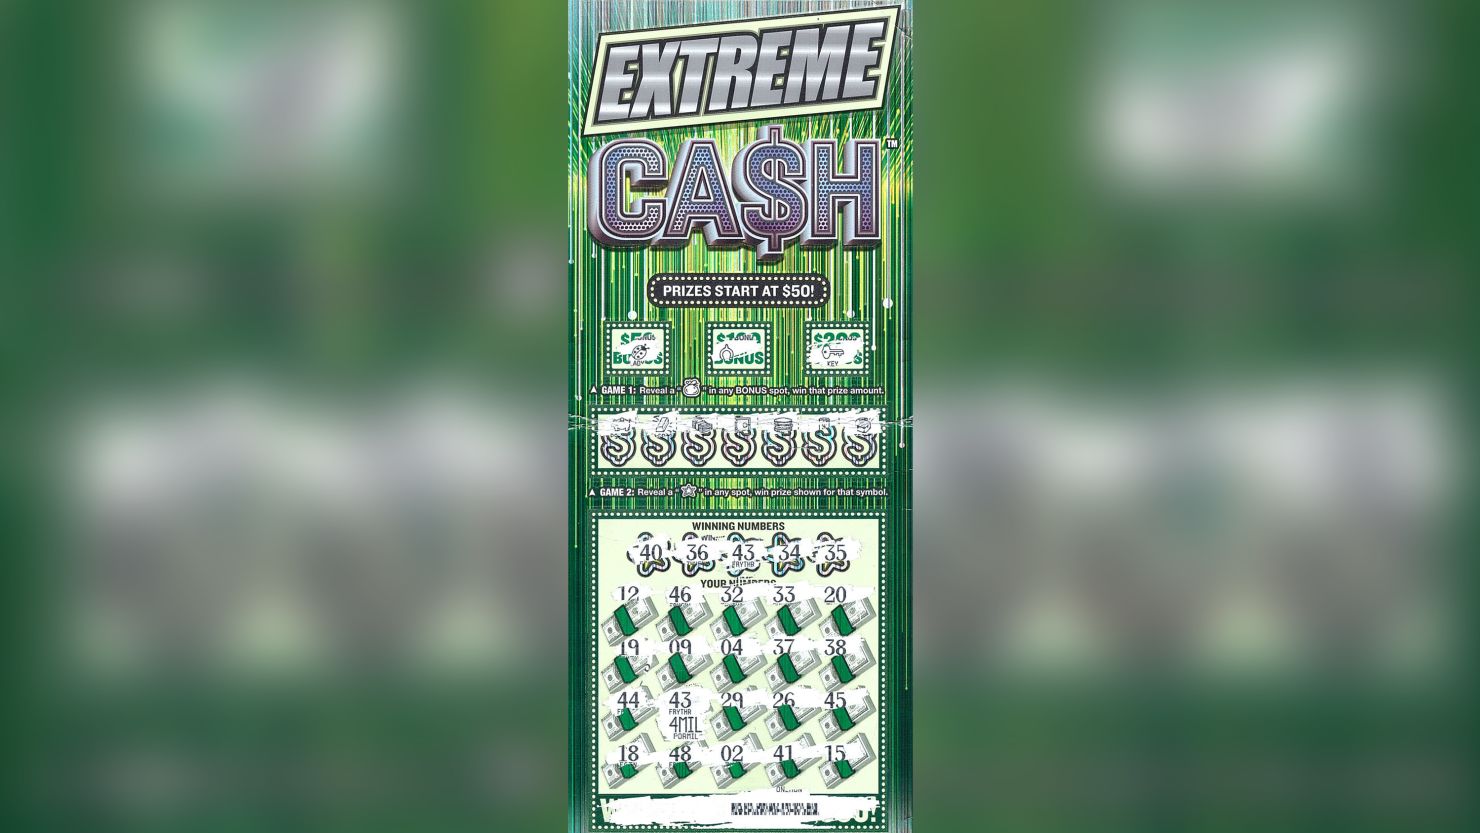 The winner claimed the EXTREME CA$H scratch-off game's top prize.